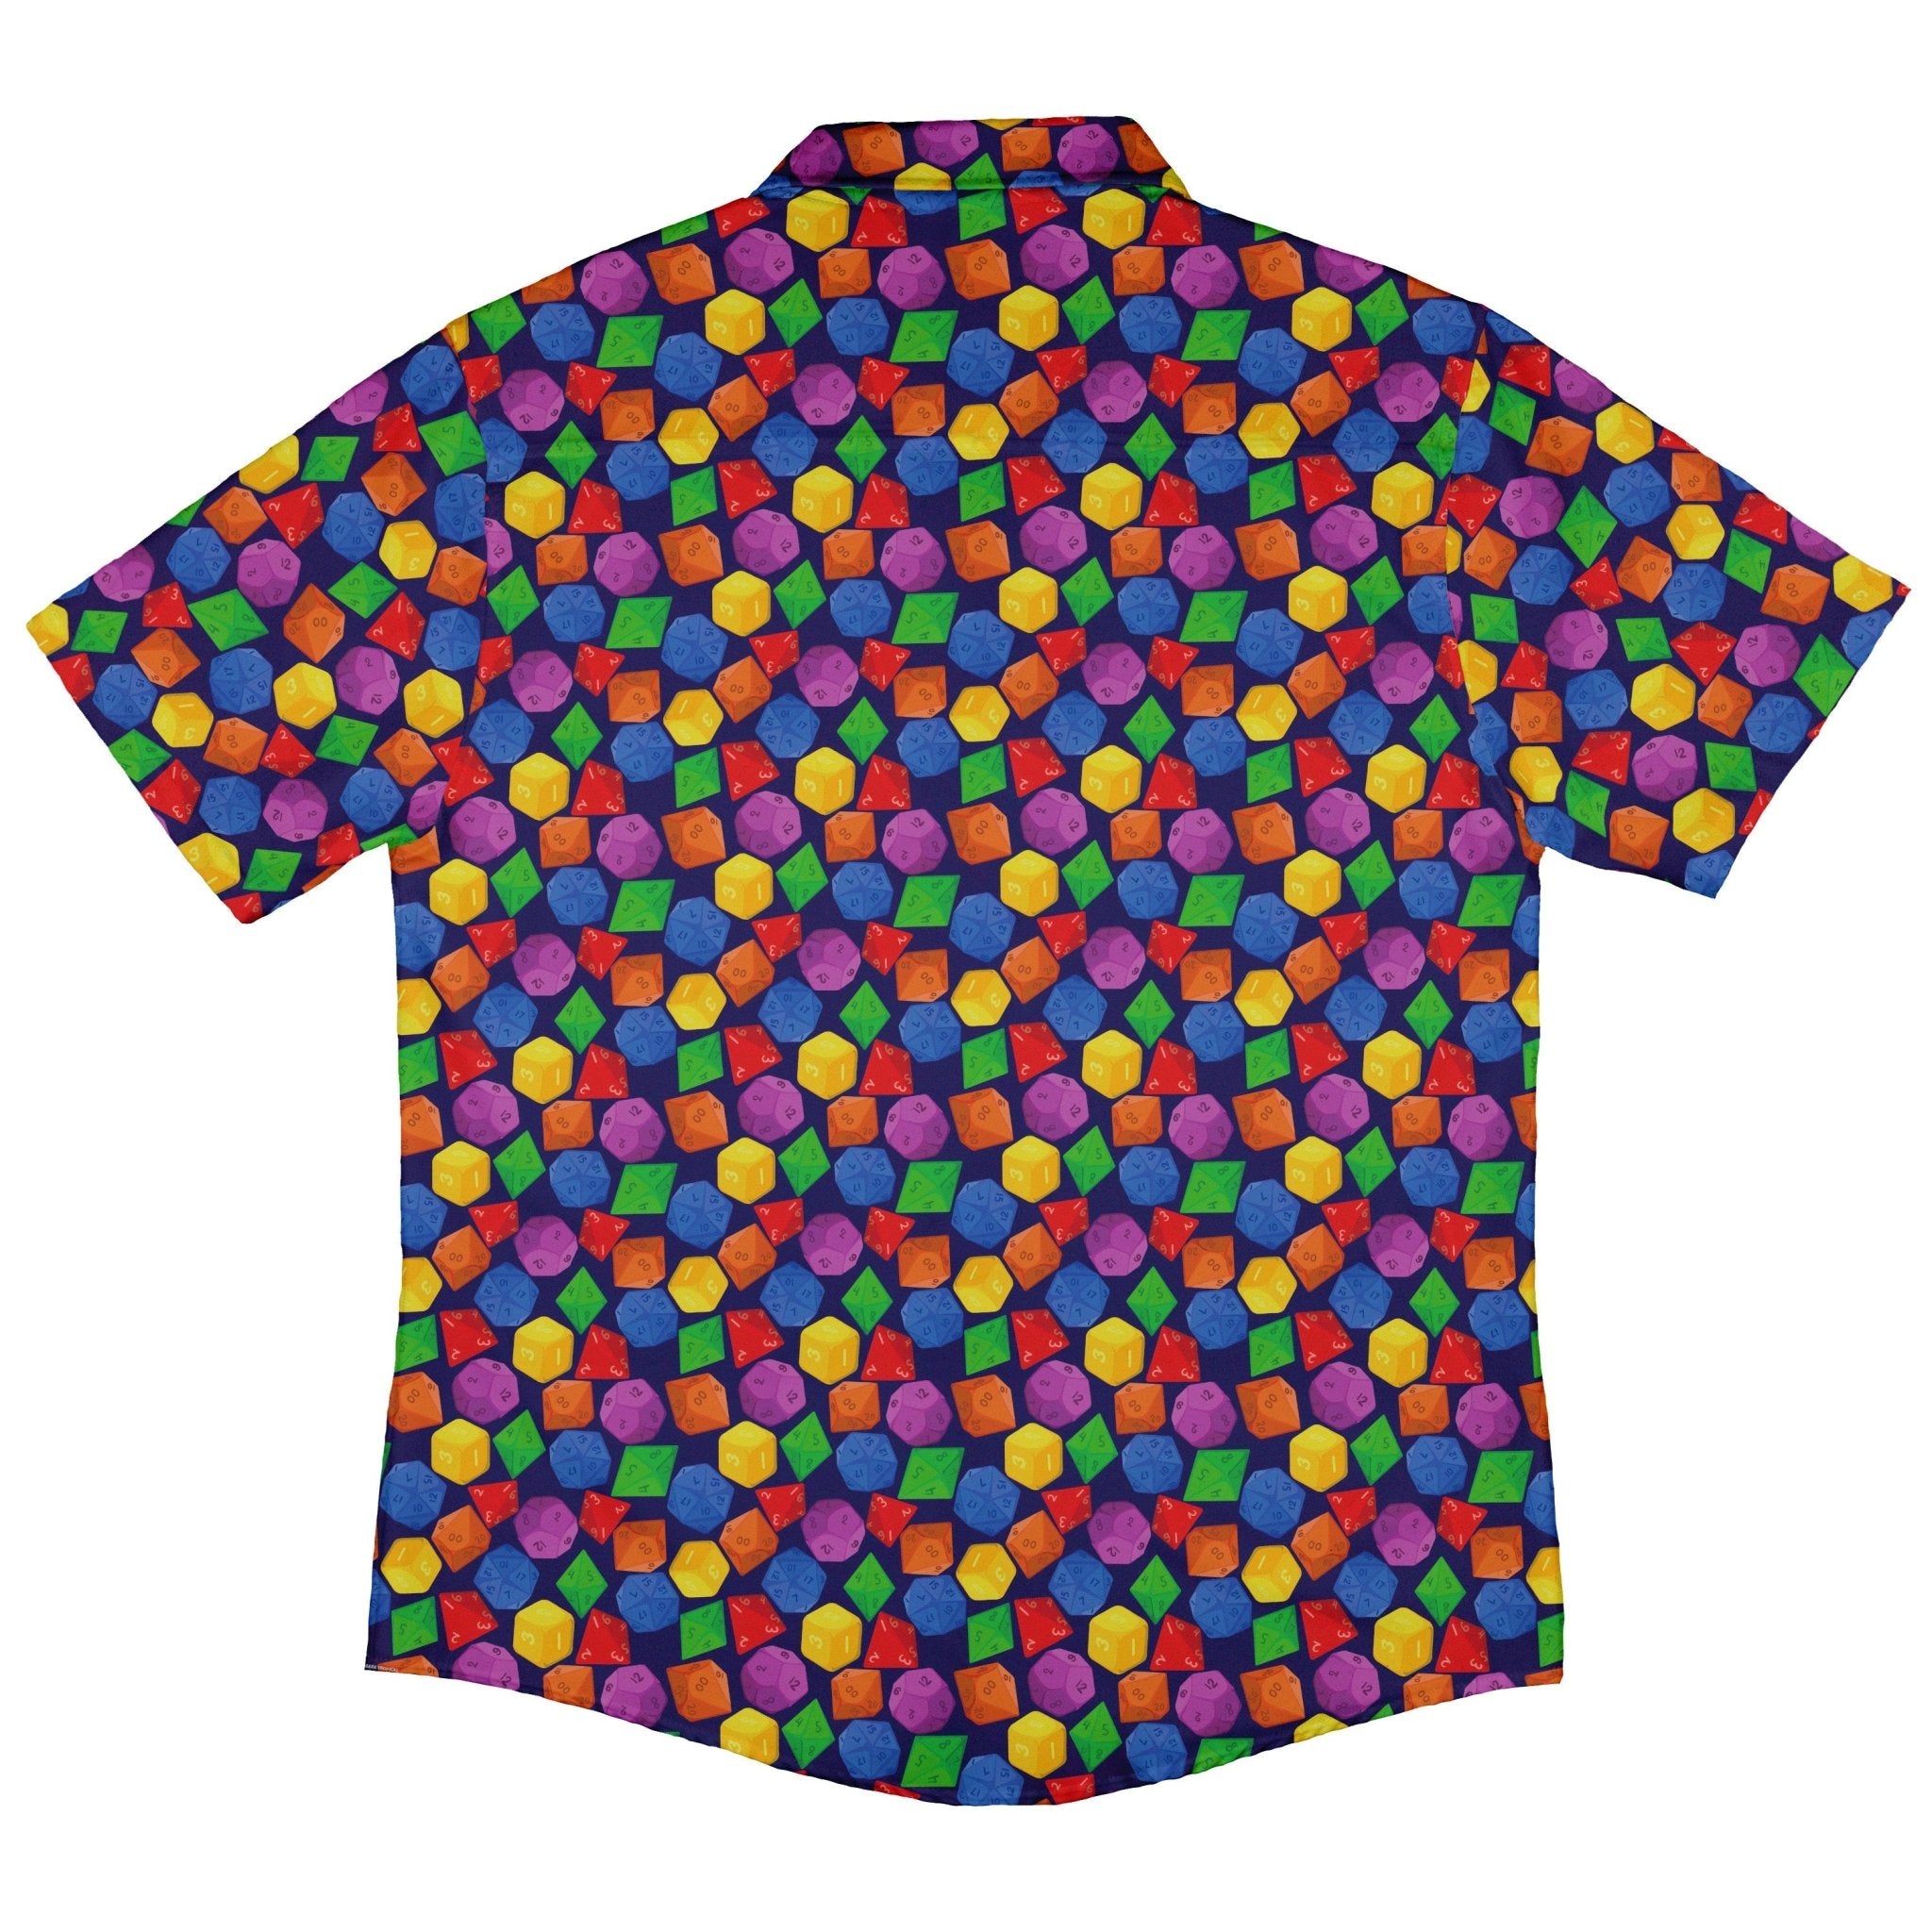 Colorful RPG Dice Pattern Blue Dnd Button Up Shirt - adult sizing - dnd & rpg print - Maximalist Patterns